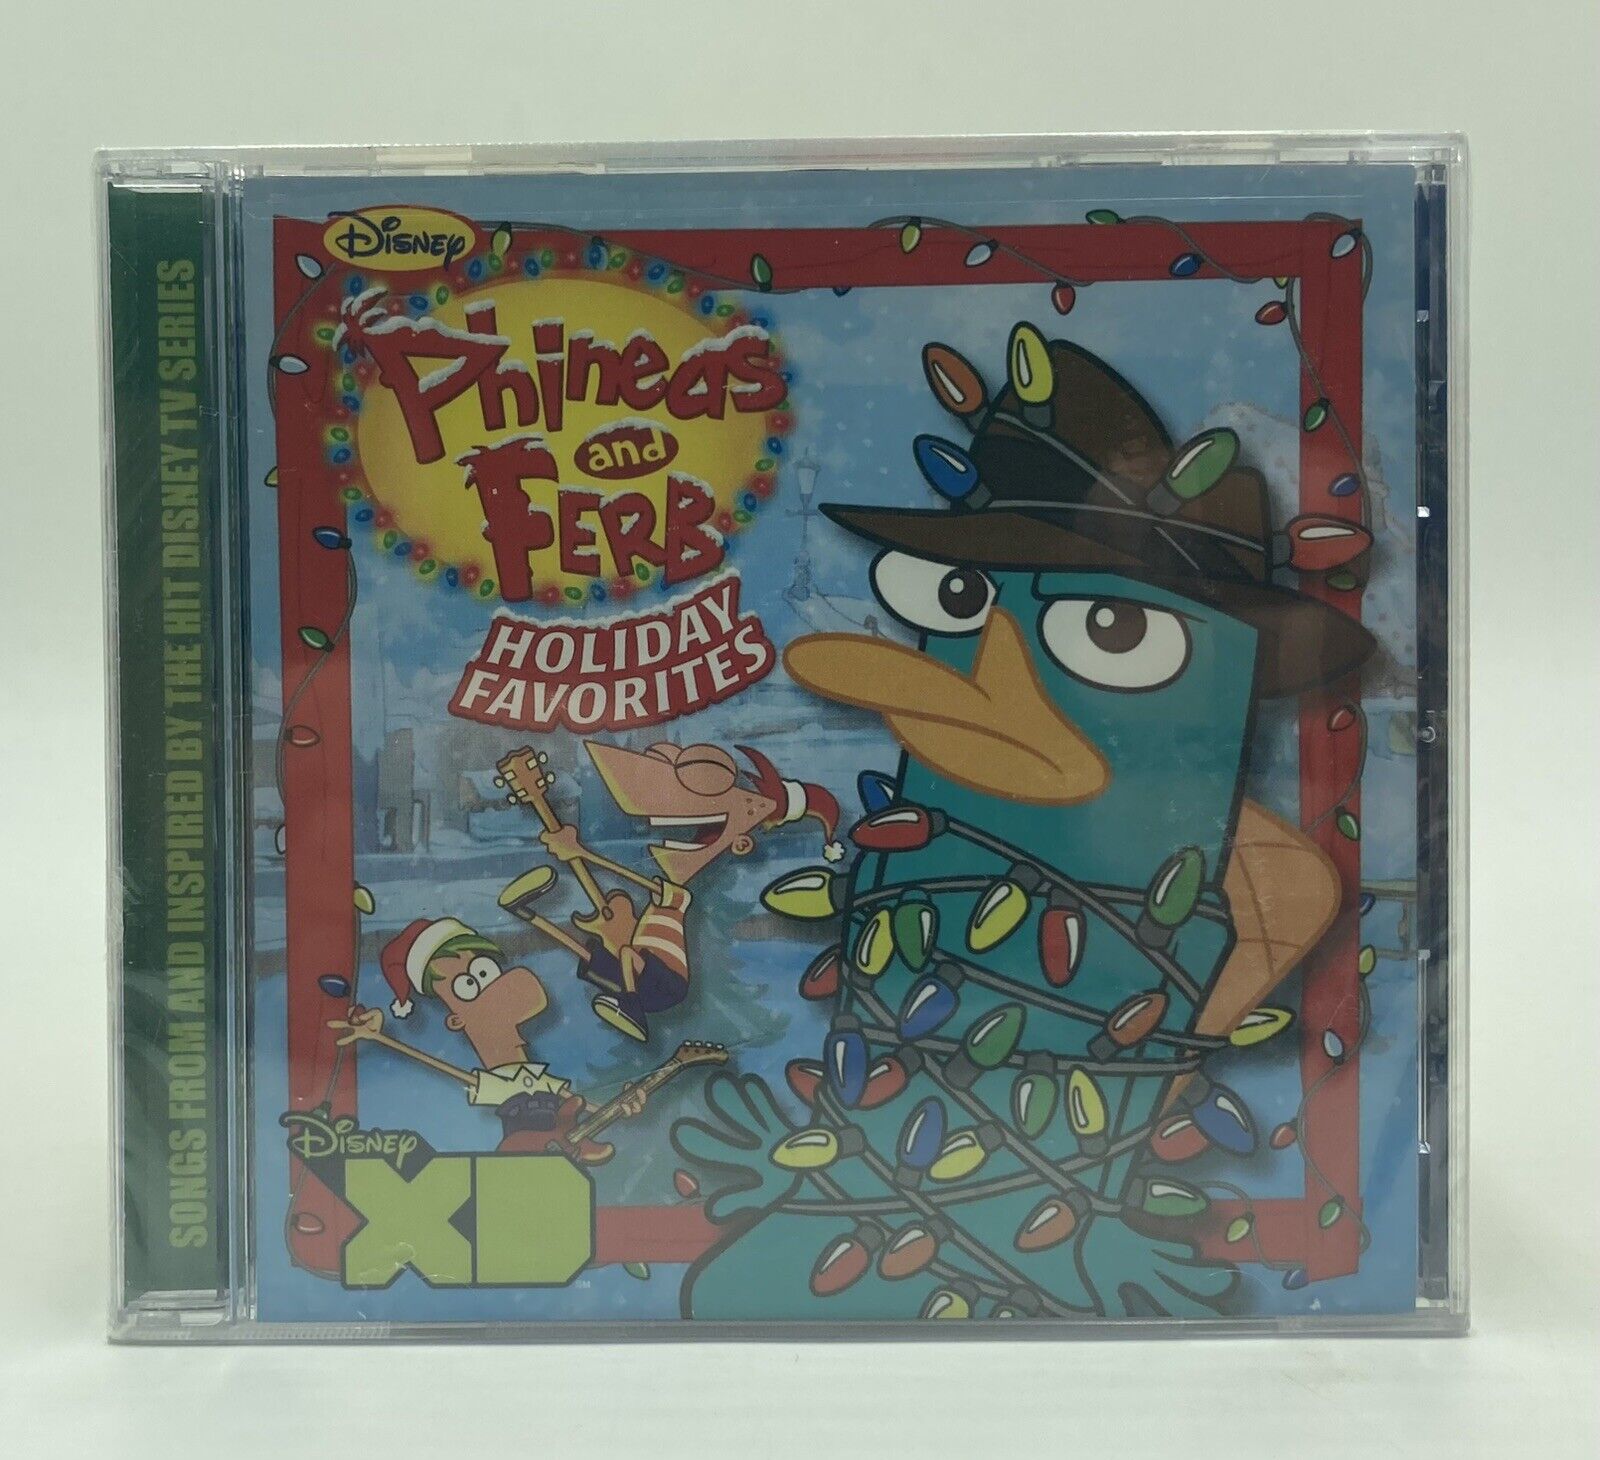 Disney’s Phineas And Ferb Holiday Favorites CD *Brand New & Sealed* Christmas